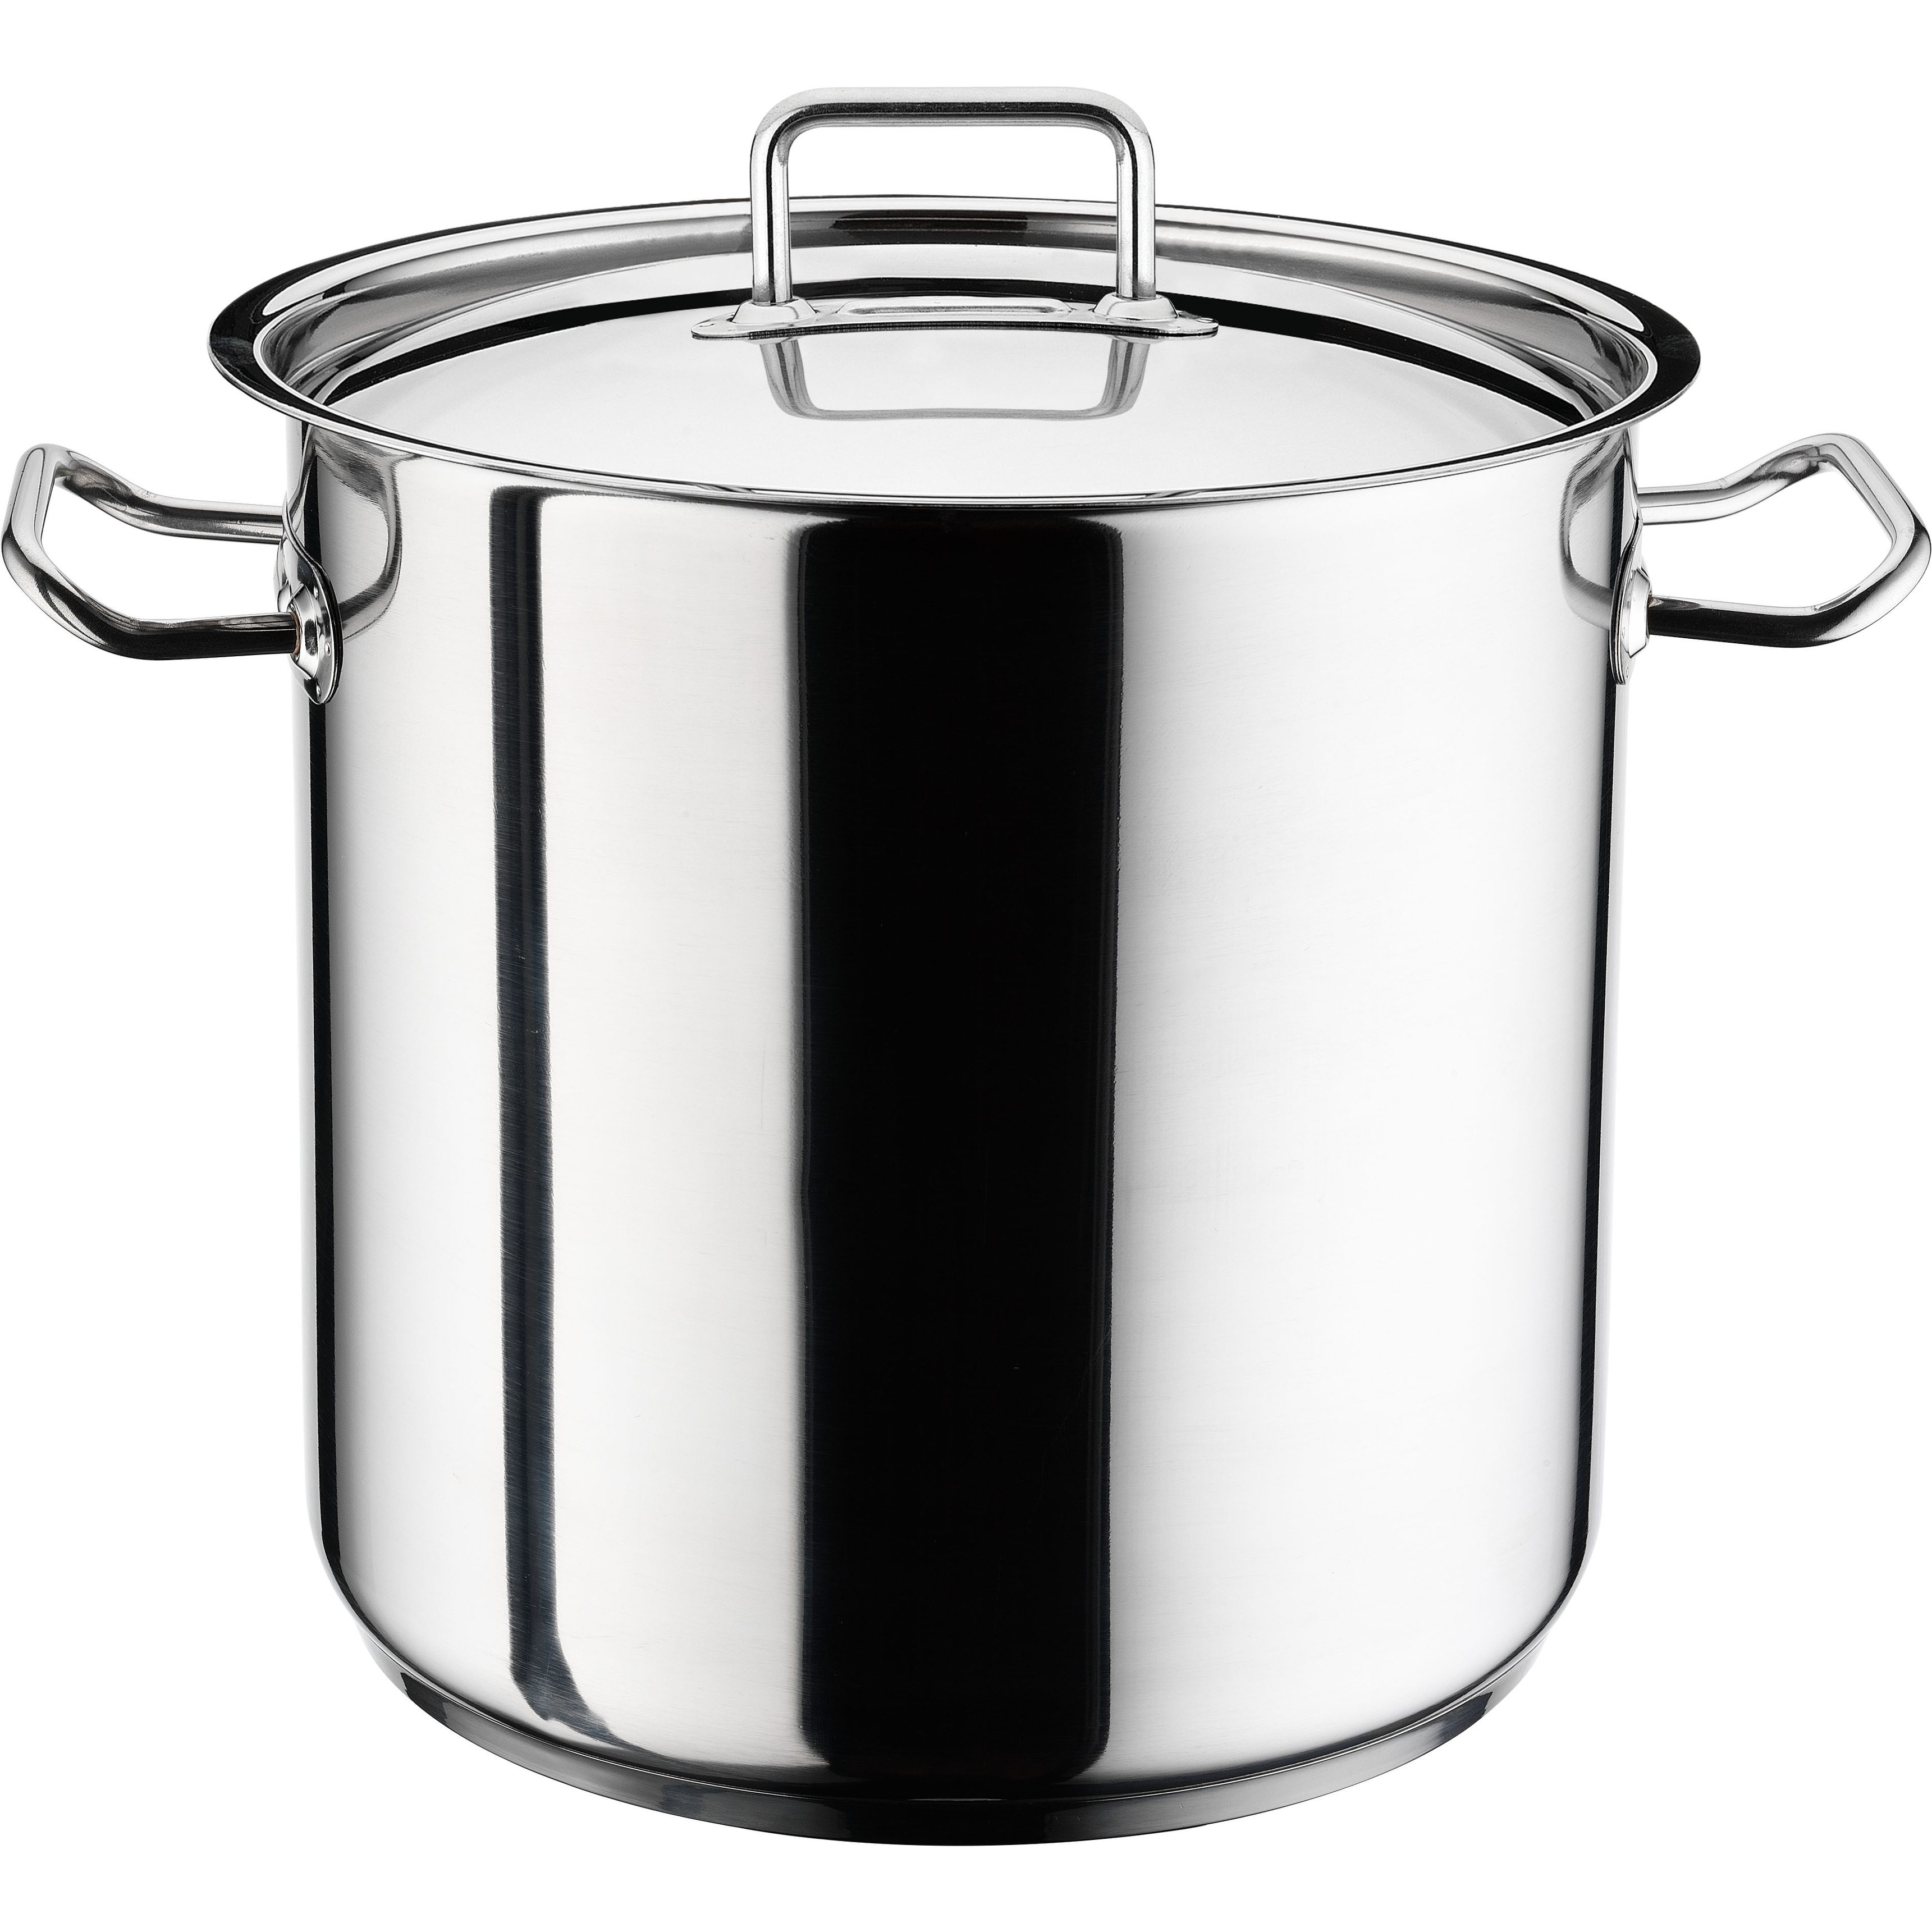 Chef's Induction 18/10 Stainless Steel Stockpot with Lid, Multi-Purpose  Cookware - On Sale - Bed Bath & Beyond - 32594864